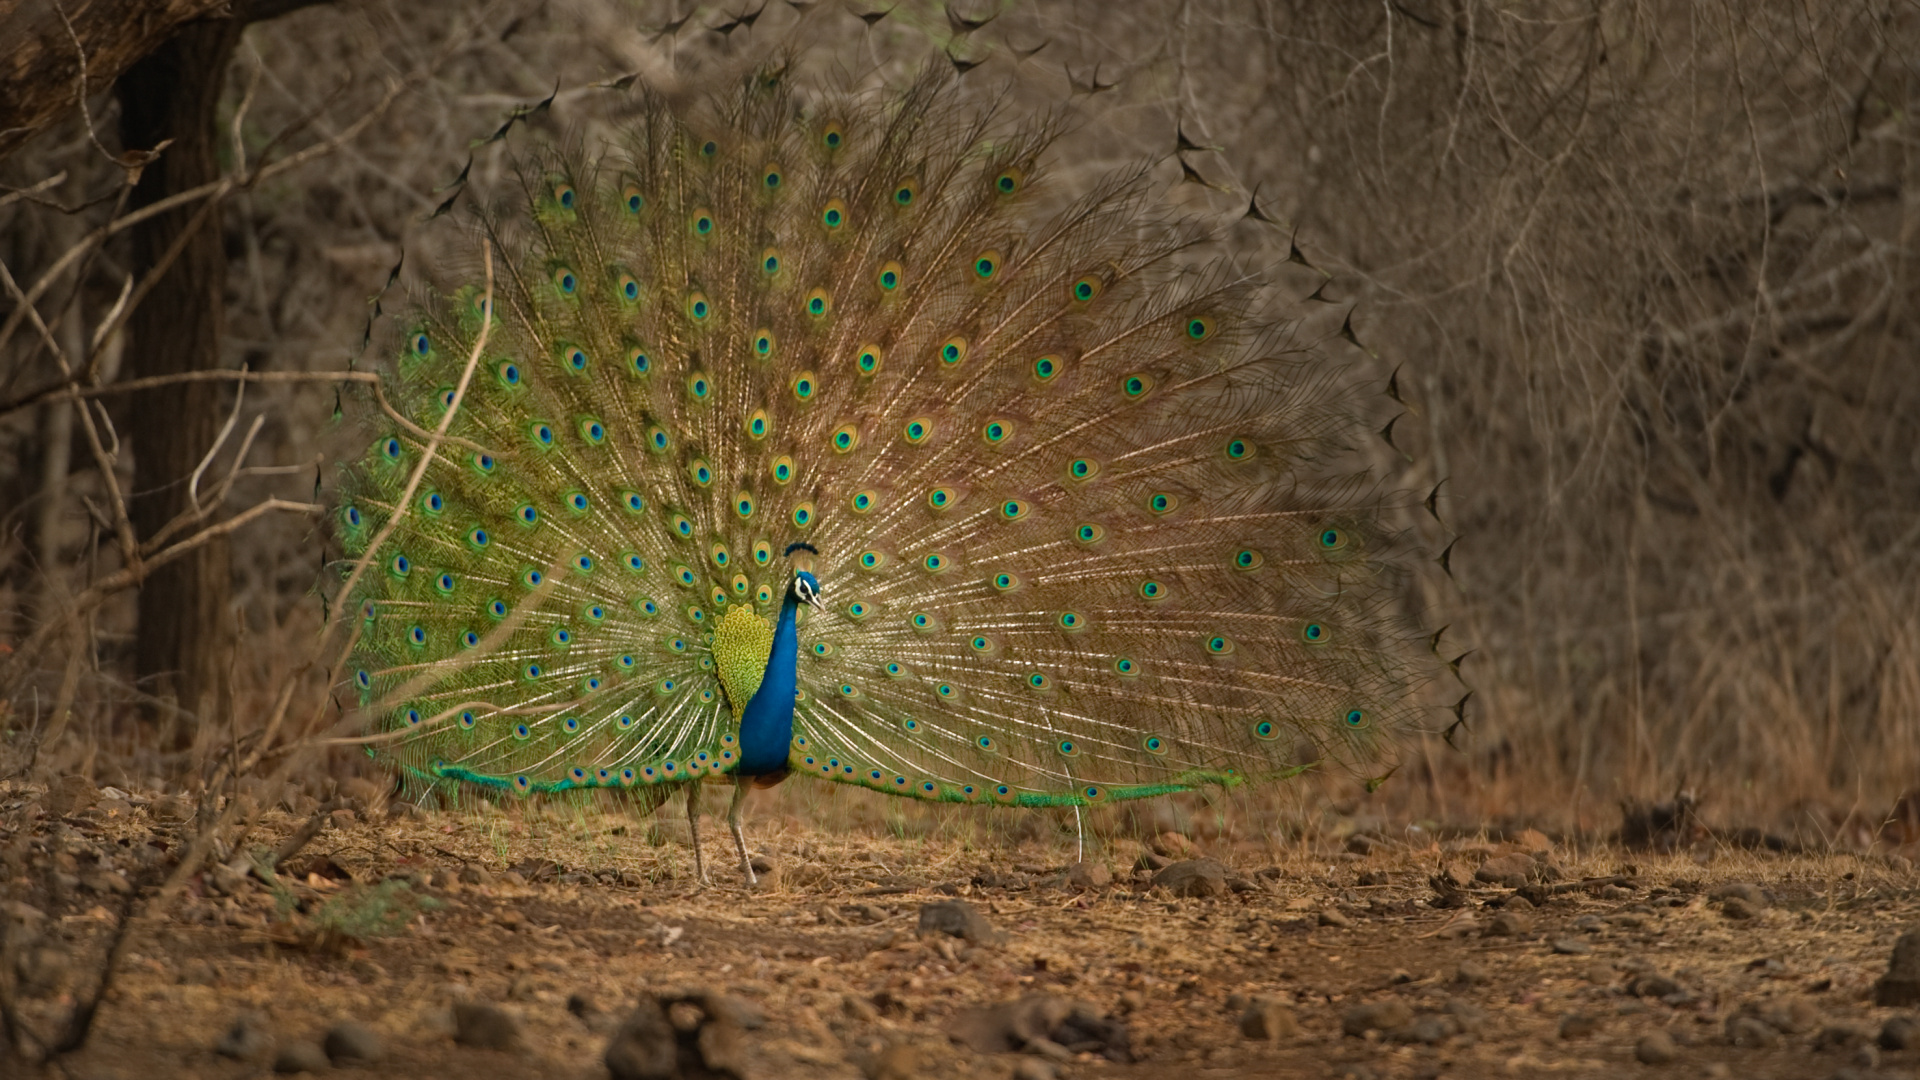 Peacock on Brown Soil Near Bare Trees During Daytime. Wallpaper in 1920x1080 Resolution